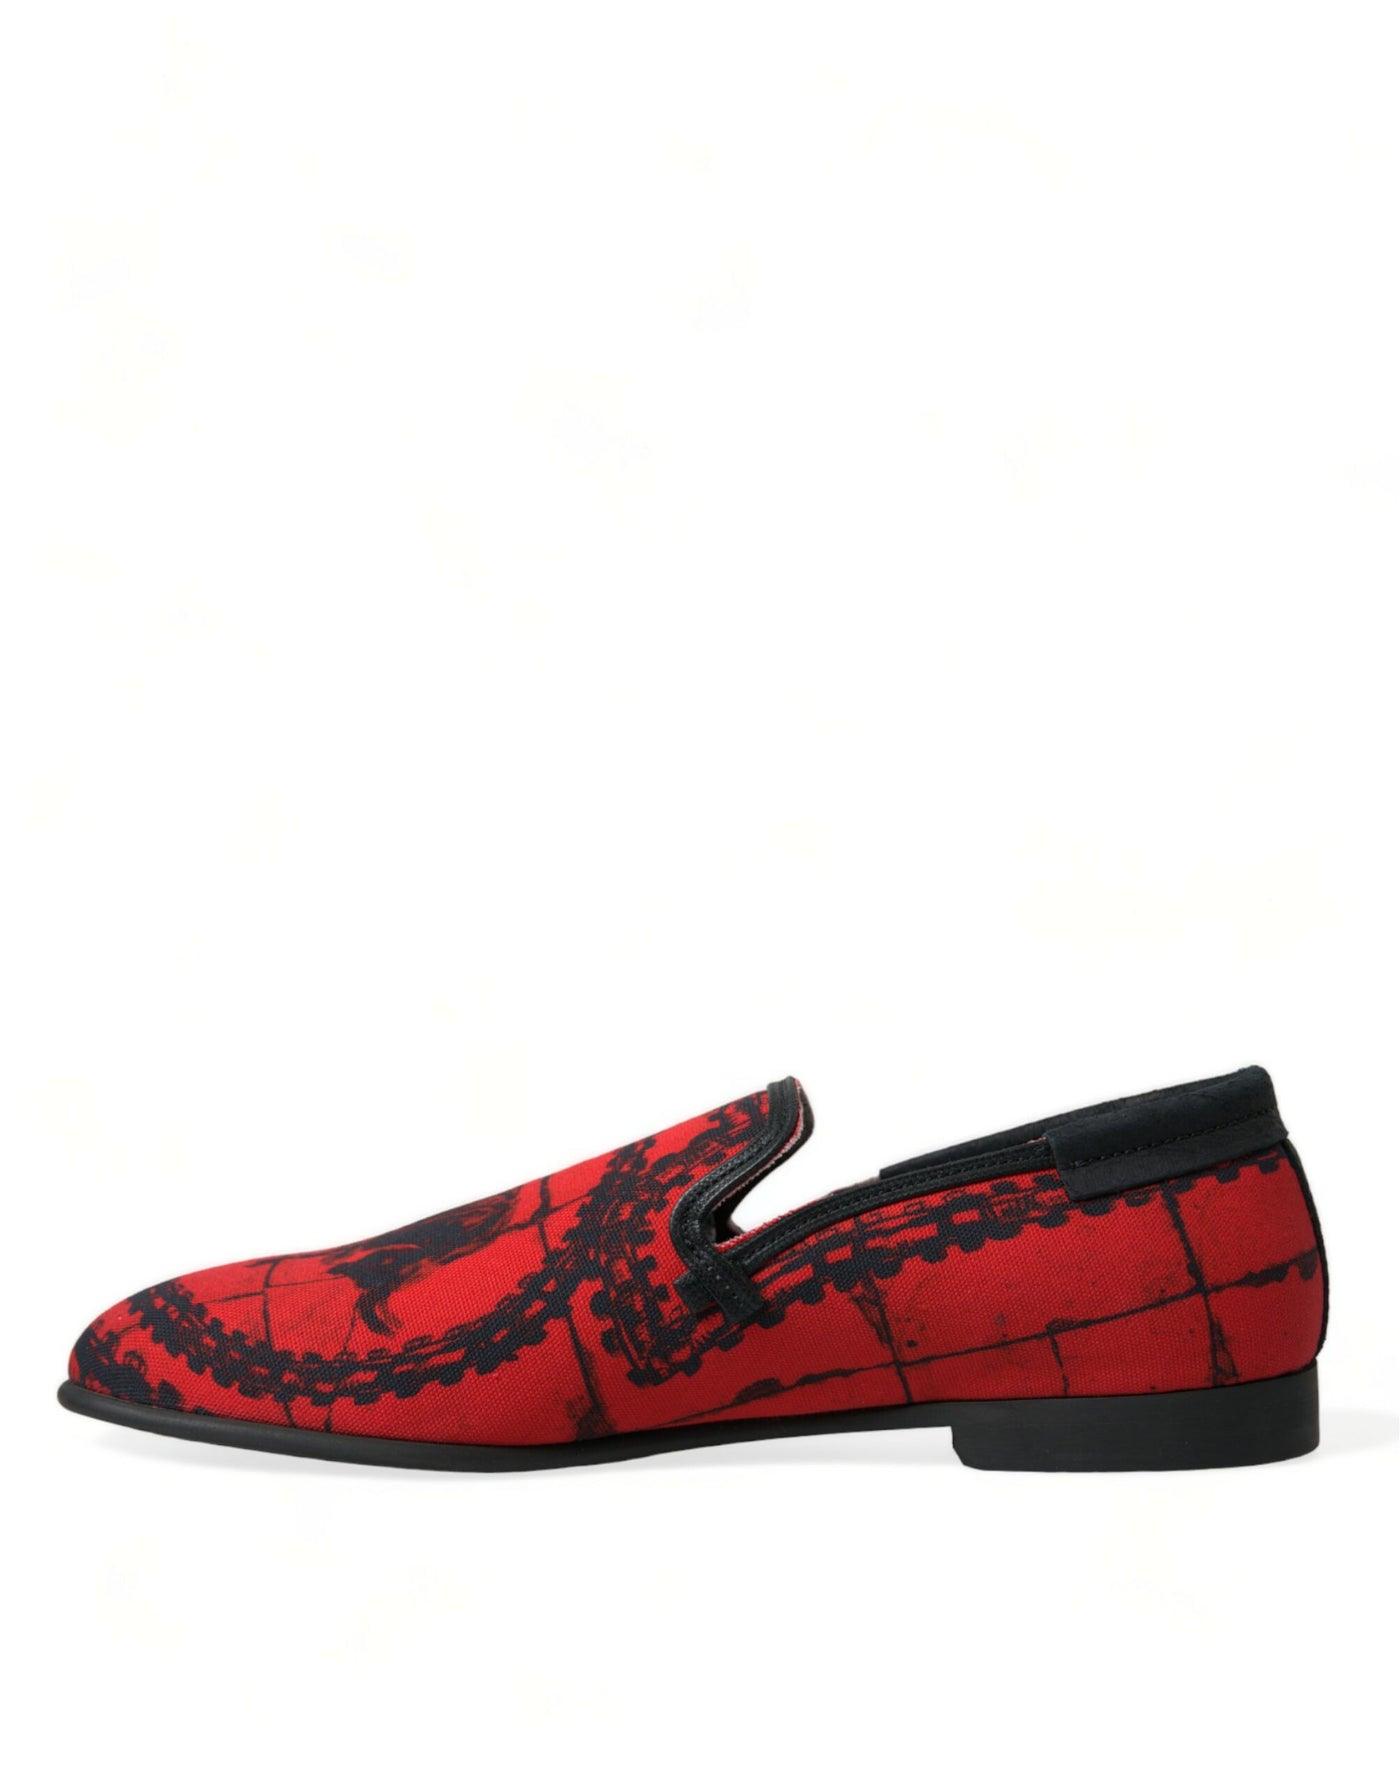 Dolce & Gabbana Red Black Torero Loafers Slippers Men Shoes